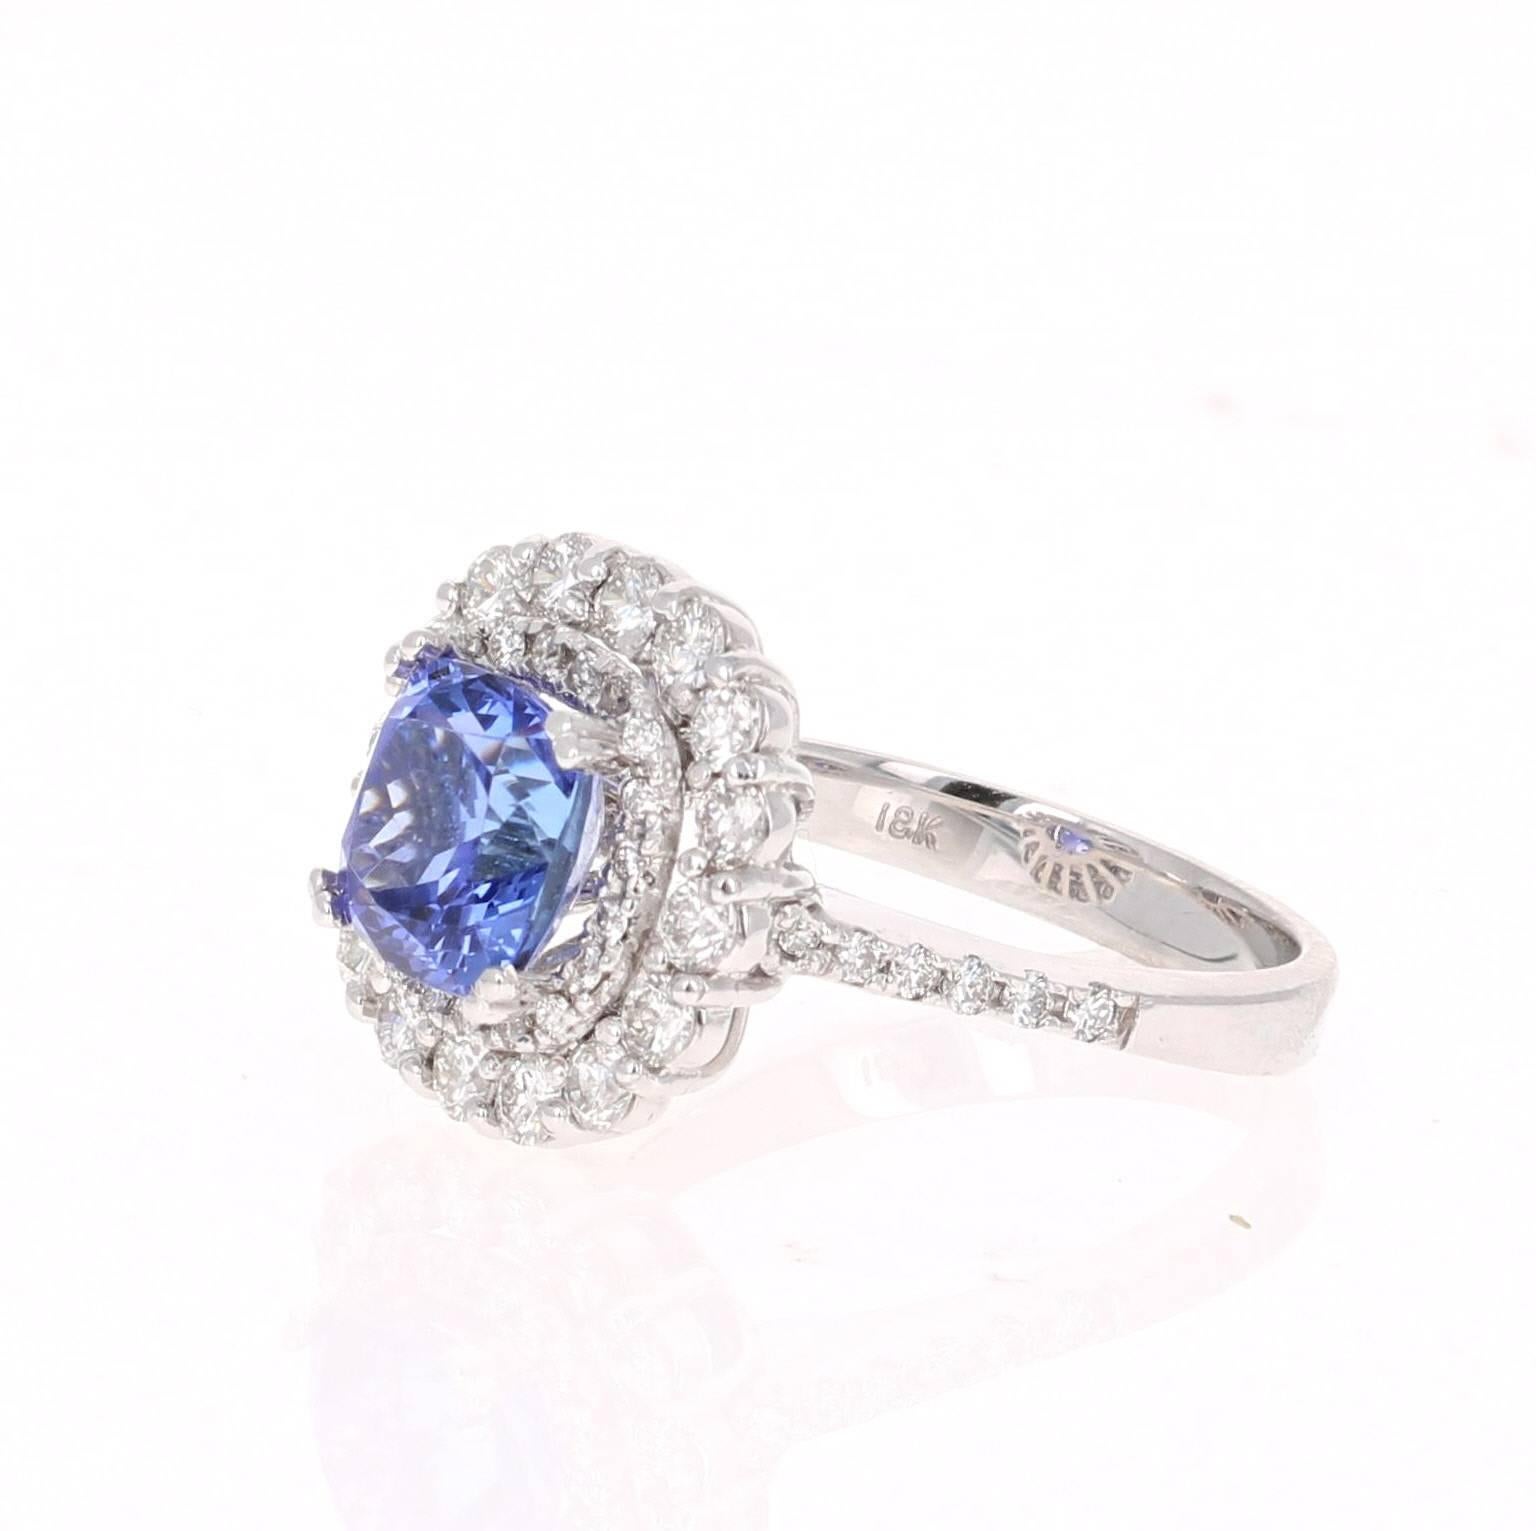 This gorgeous ring has a 2.76 Carat Cushion Cut Tanzanite that is set in the center of the ring.  The Tanzanite is surrounded by 2 rows of 47 Round Cut Diamonds that weigh 1.07 carats (Clarity: VS2, Color: F)  The total carat weight of the ring is